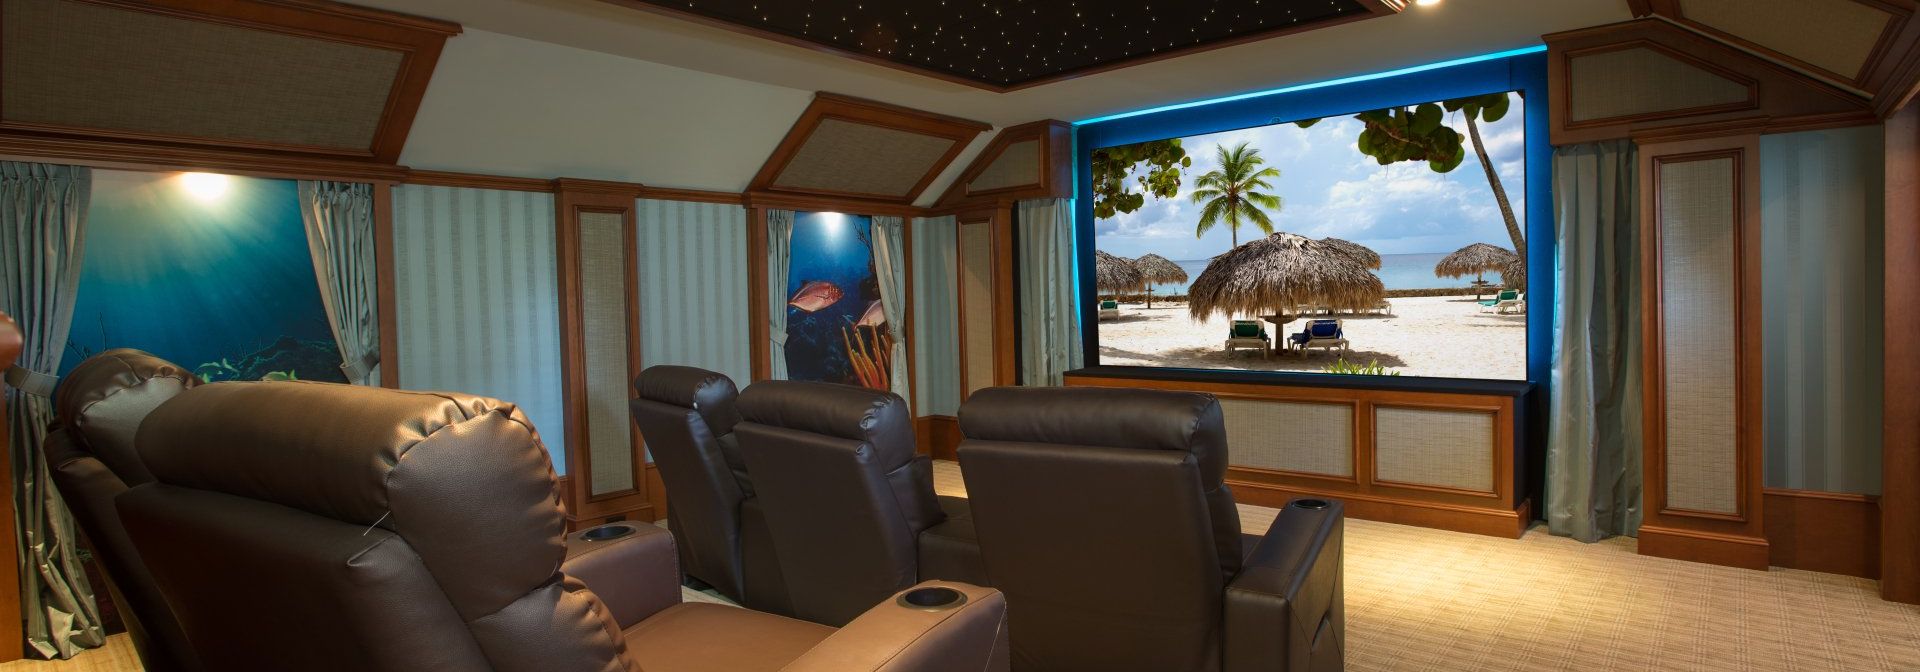 Custom Home Theater Systems